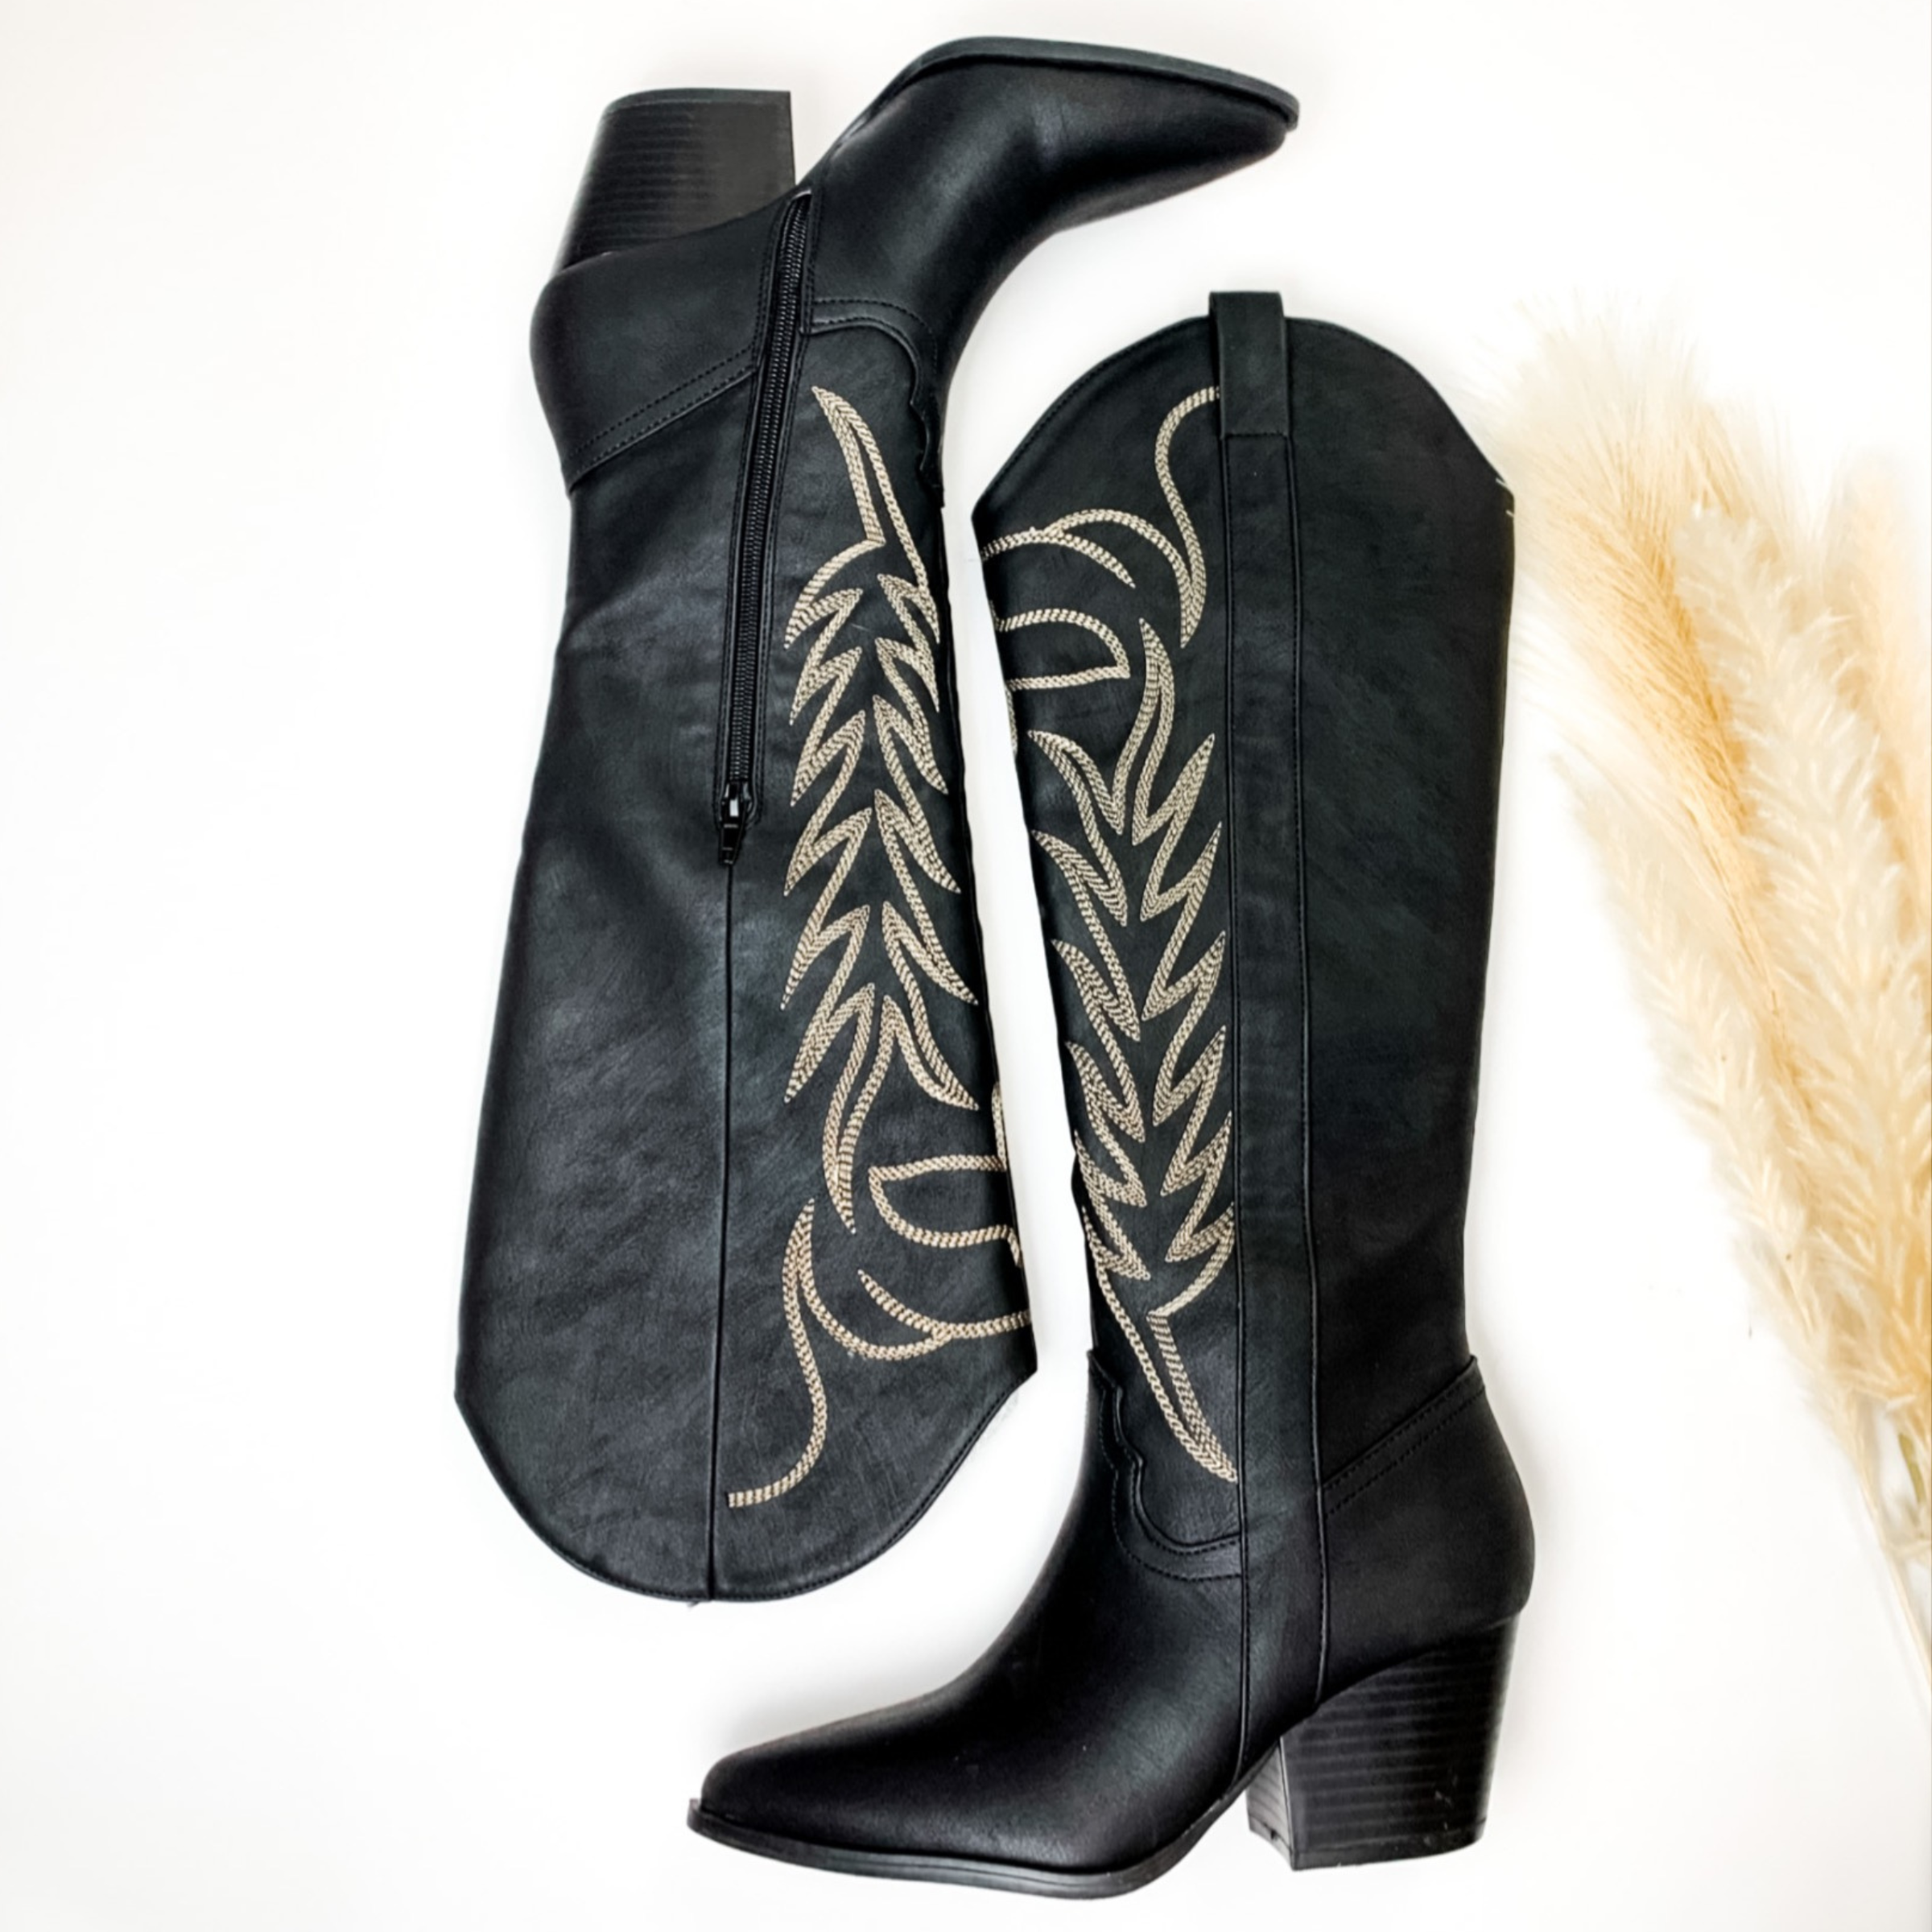 Rodeo Ready Knee High Western Stitch Boots in Black